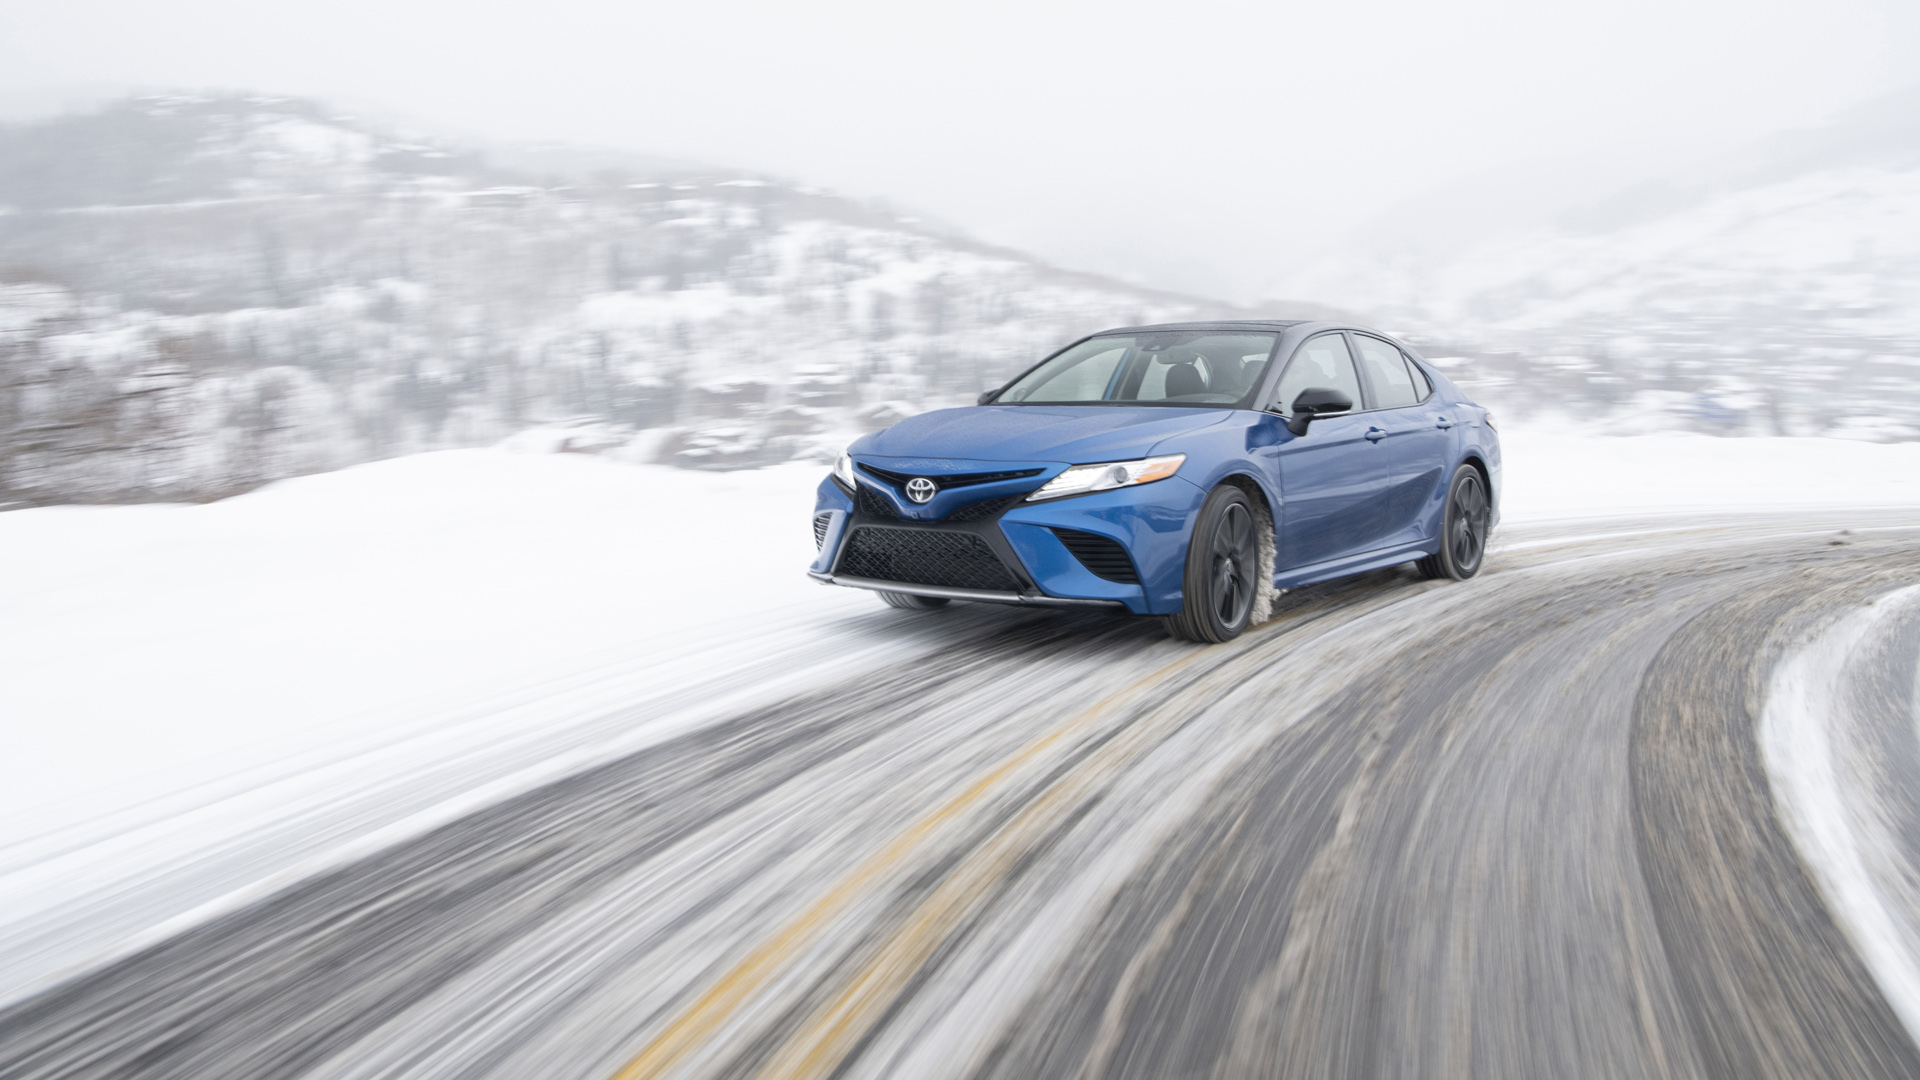 2020 Toyota Camry AWD First Drive | What's new, all-wheel drive, fuel